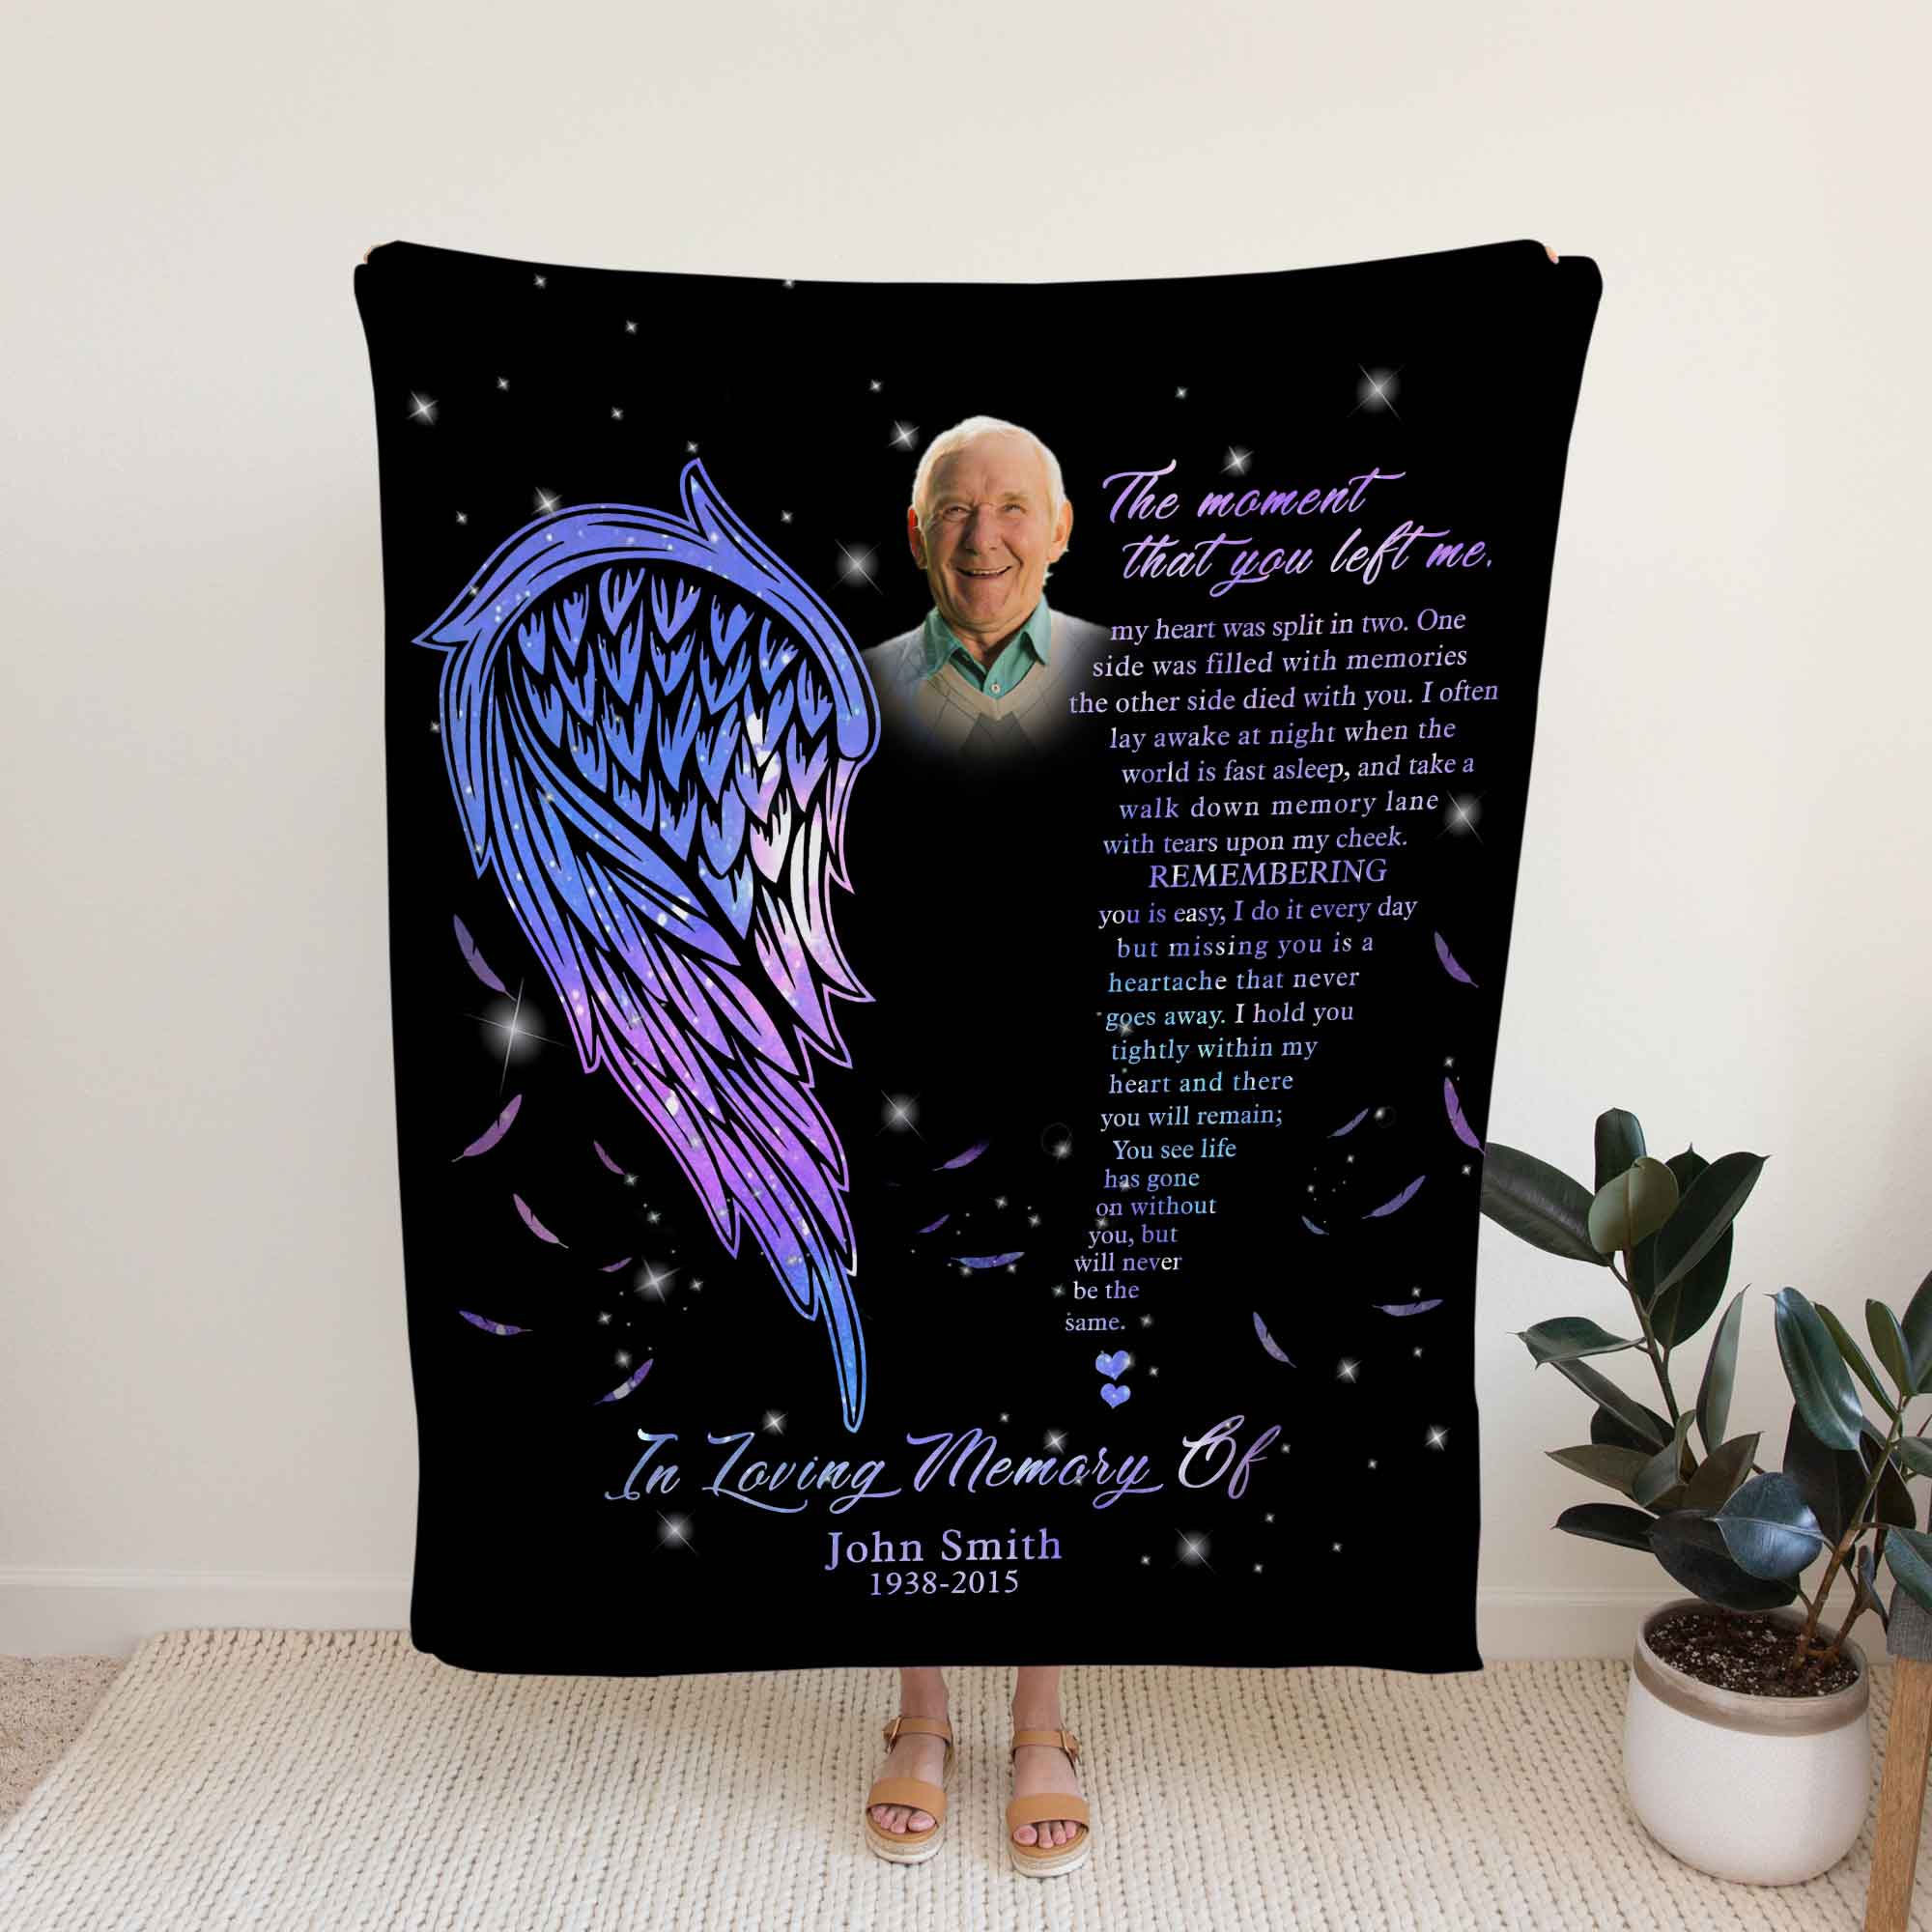 Memorial Blankets With Pictures For Loss Of Father, Fathers Day Gift, The Moment That You Left Me Grieving Blanket